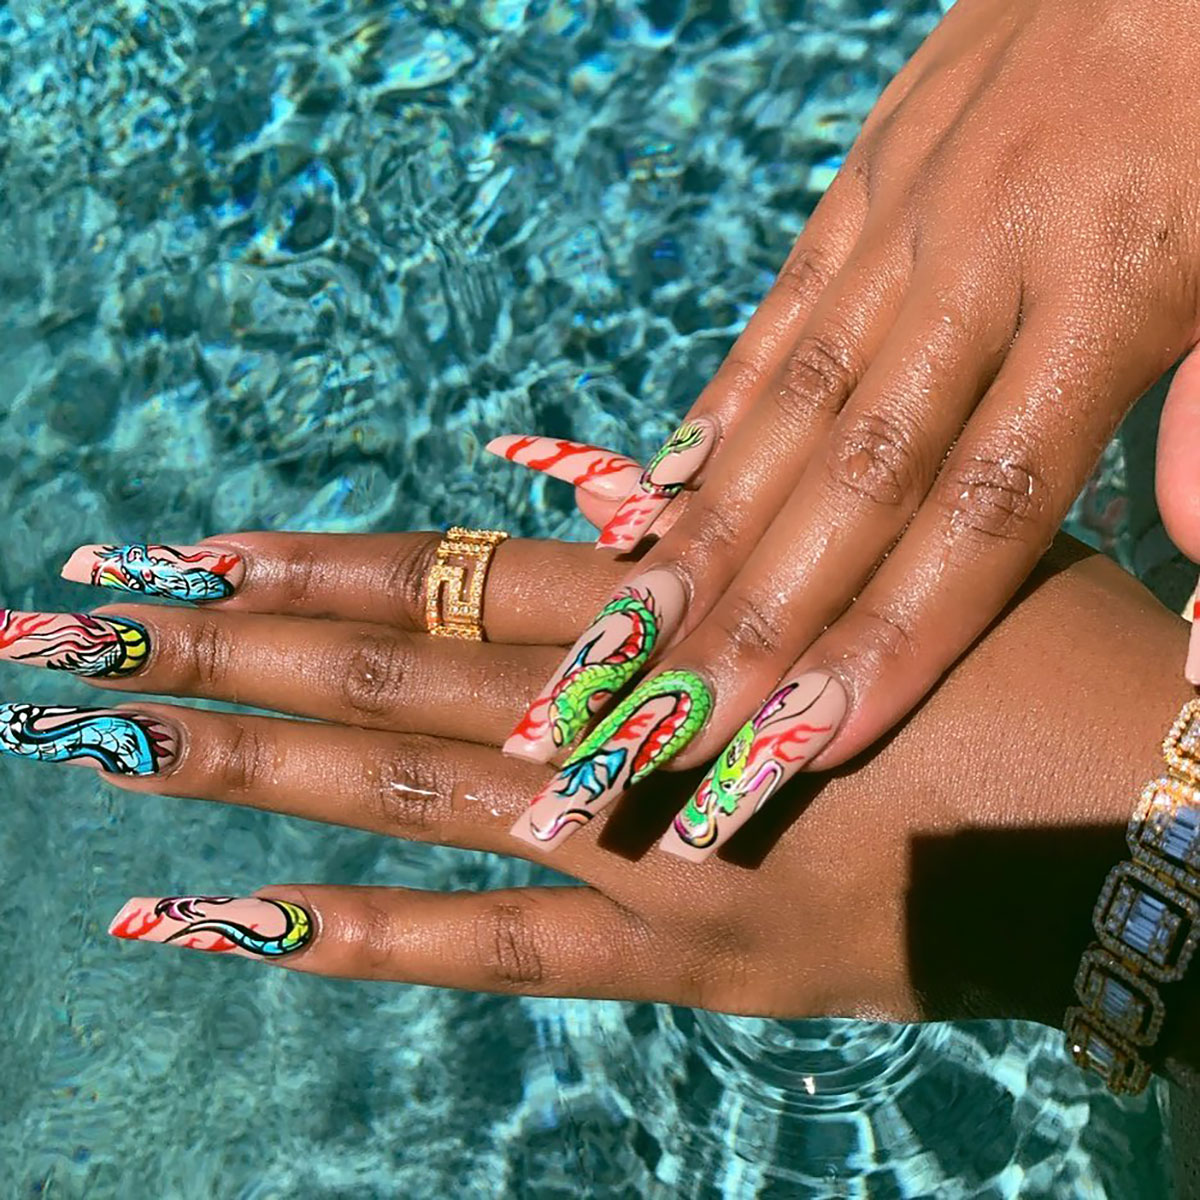 Kylie Jenner and More Celeb Nail Art Trend Inspiration, Summer 2020